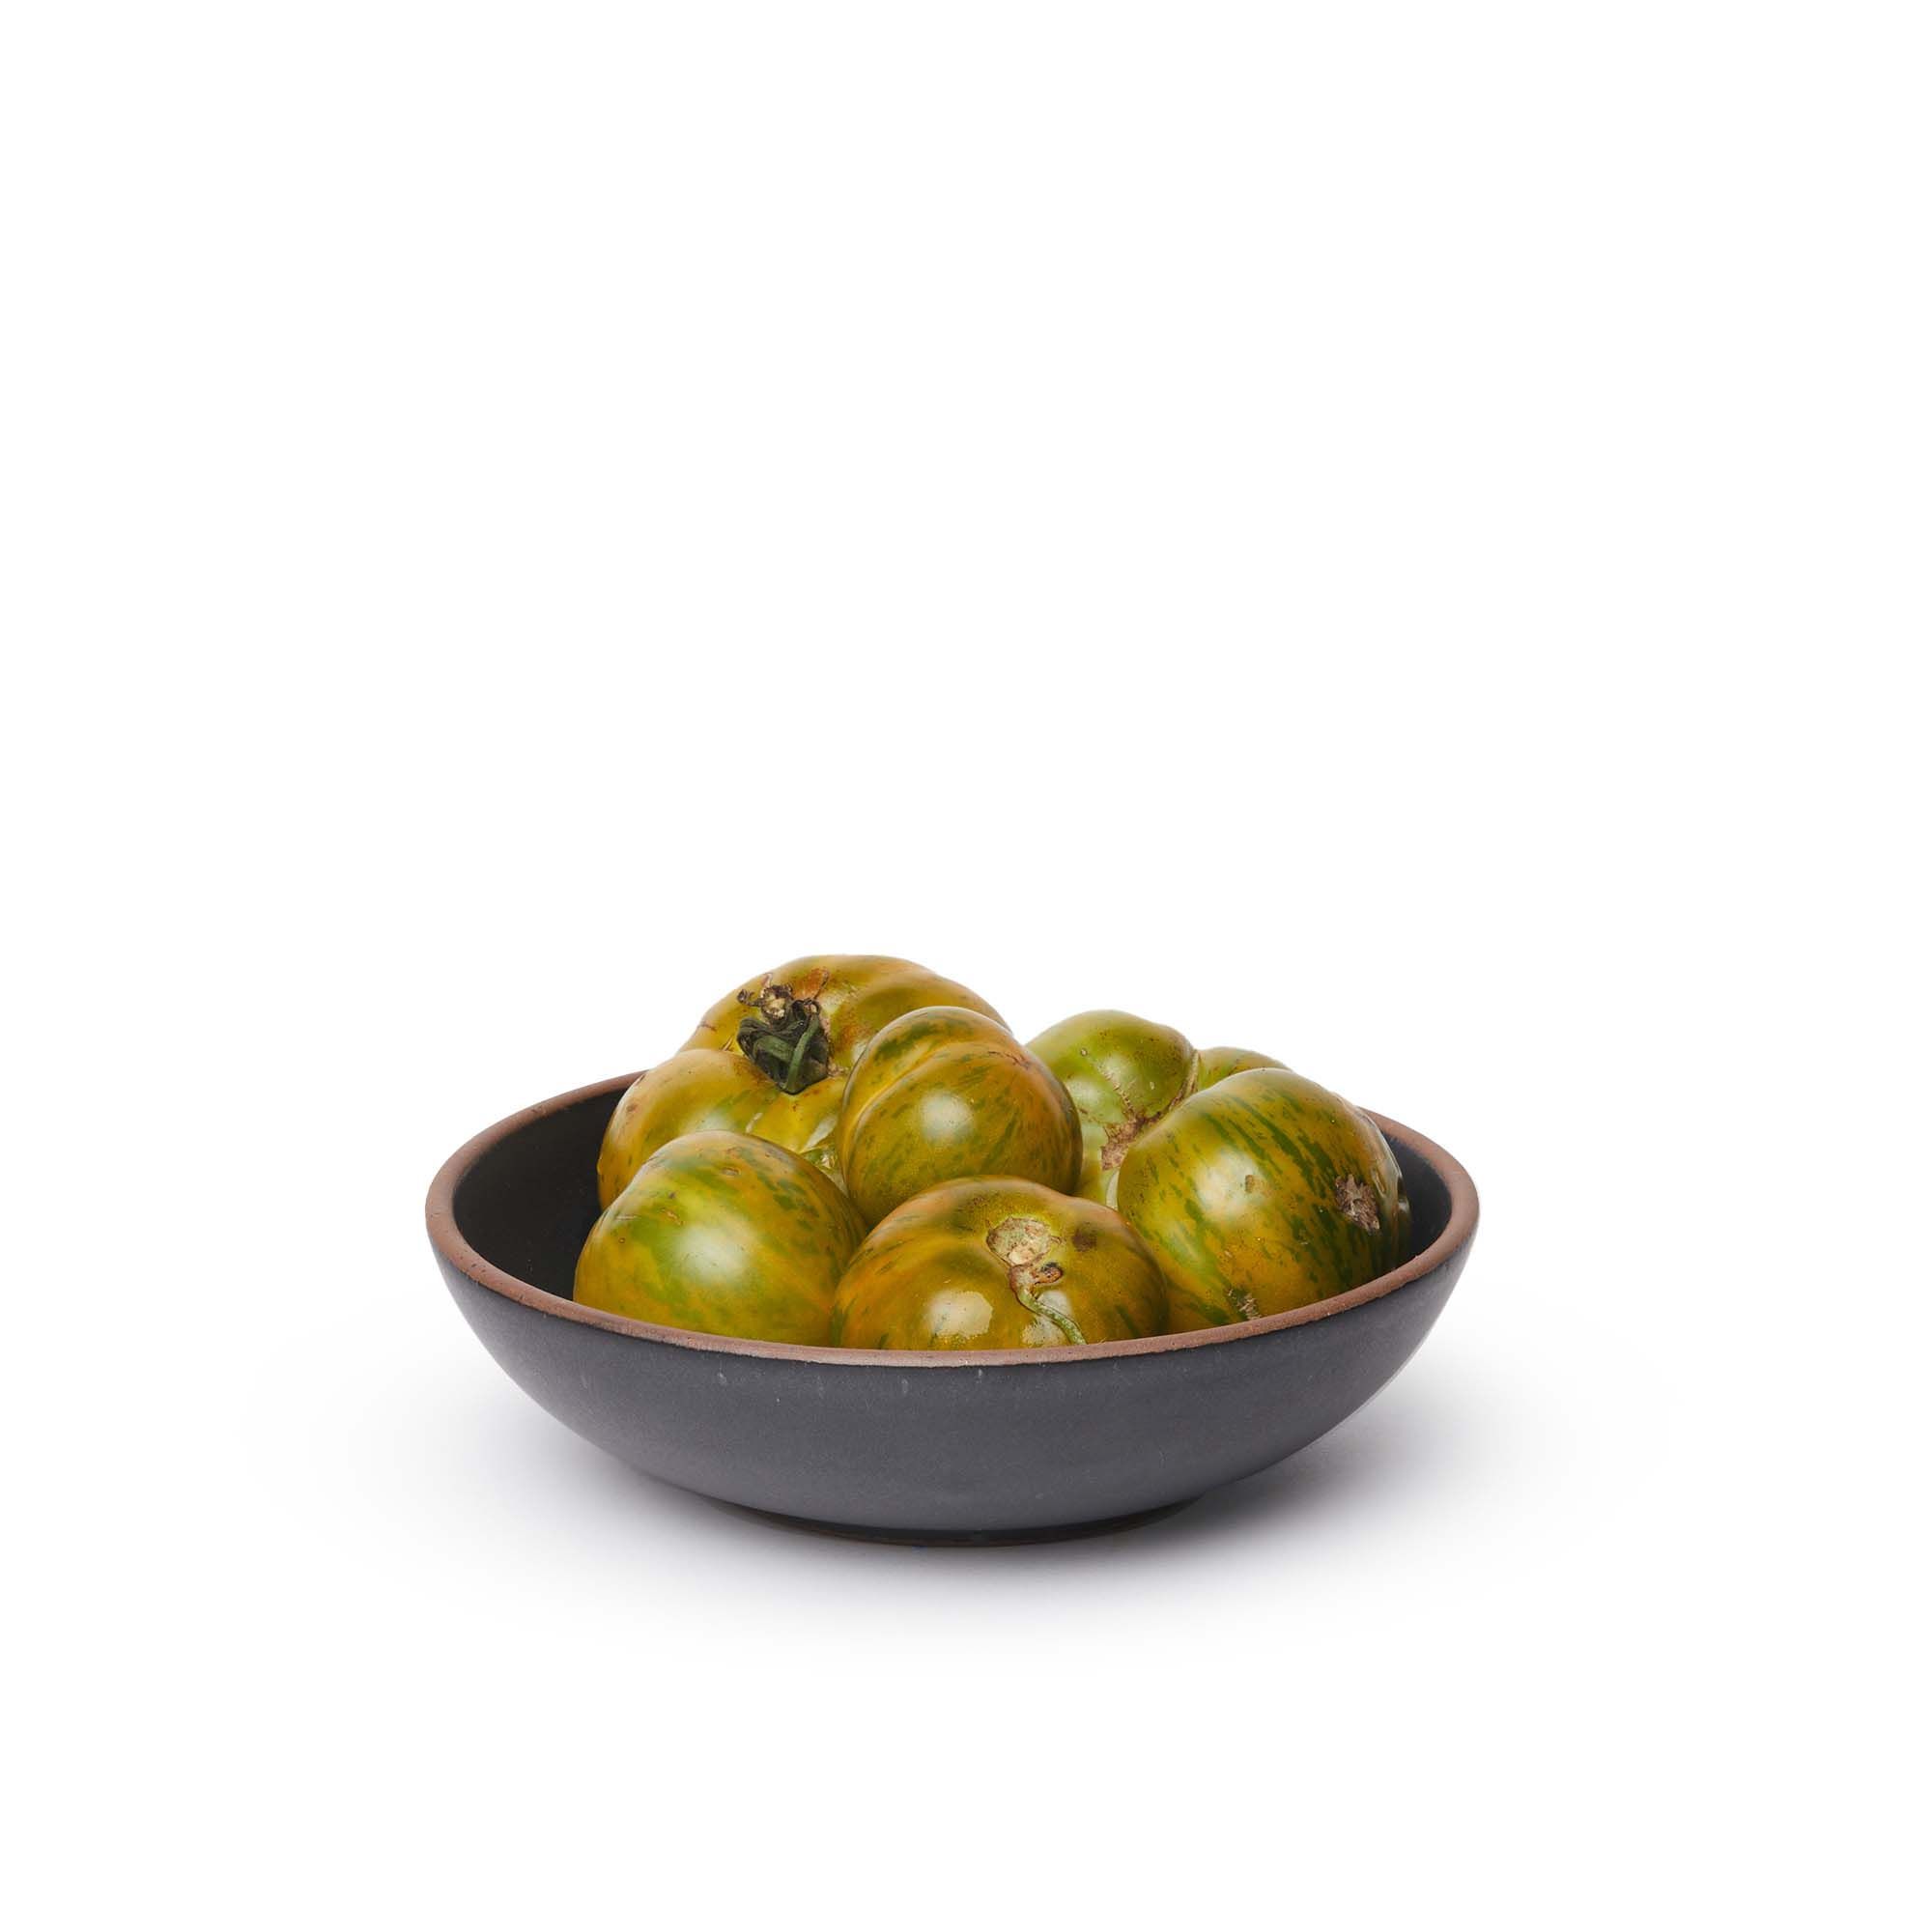 A dinner-sized shallow ceramic bowl in a graphite black color featuring iron speckles and an unglazed rim, filled with tomatoes